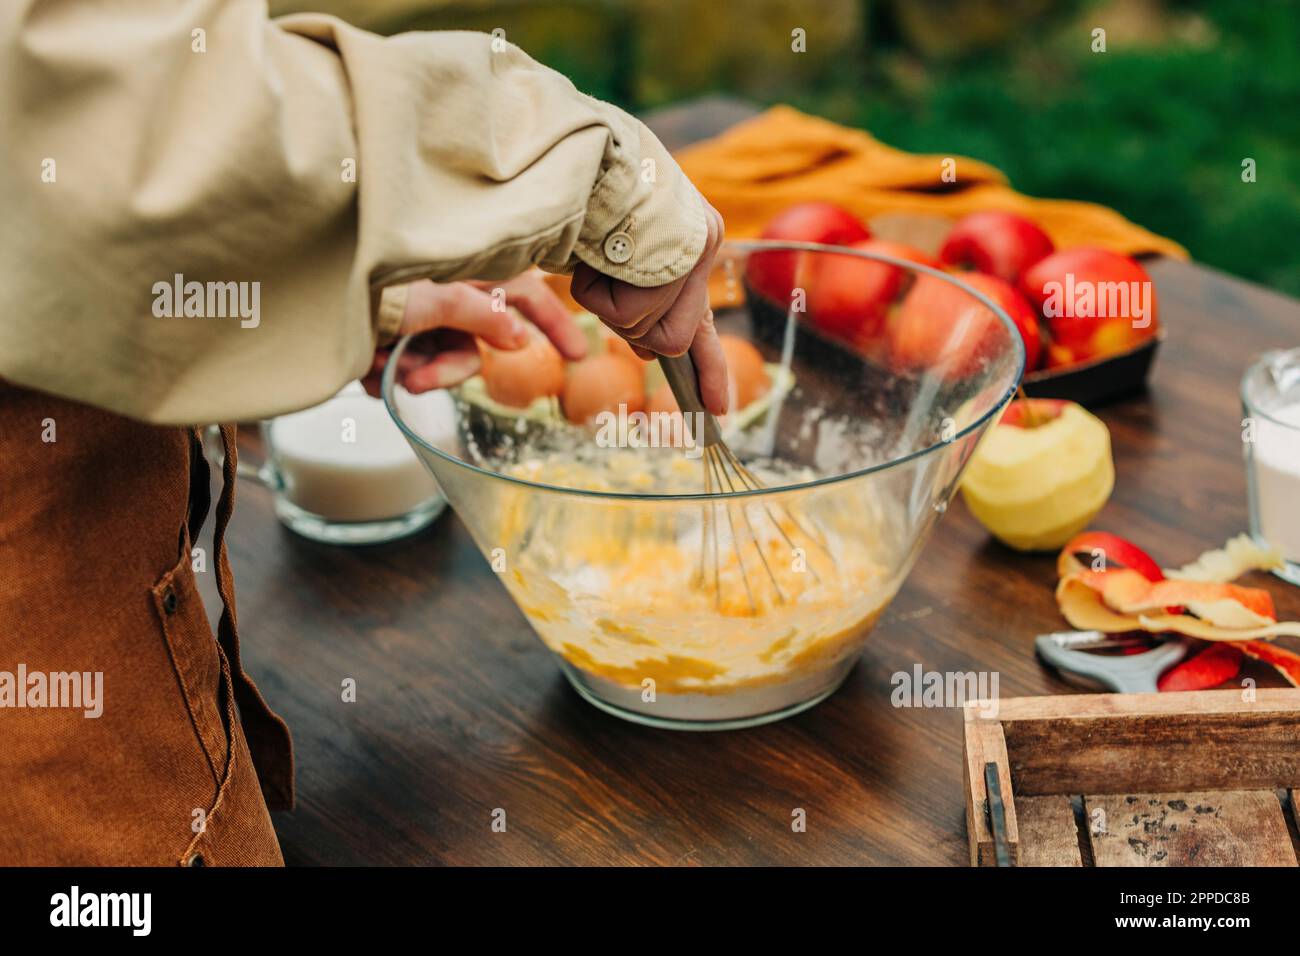 Woman whipping eggs in mixing bowl at garden table Stock Photo